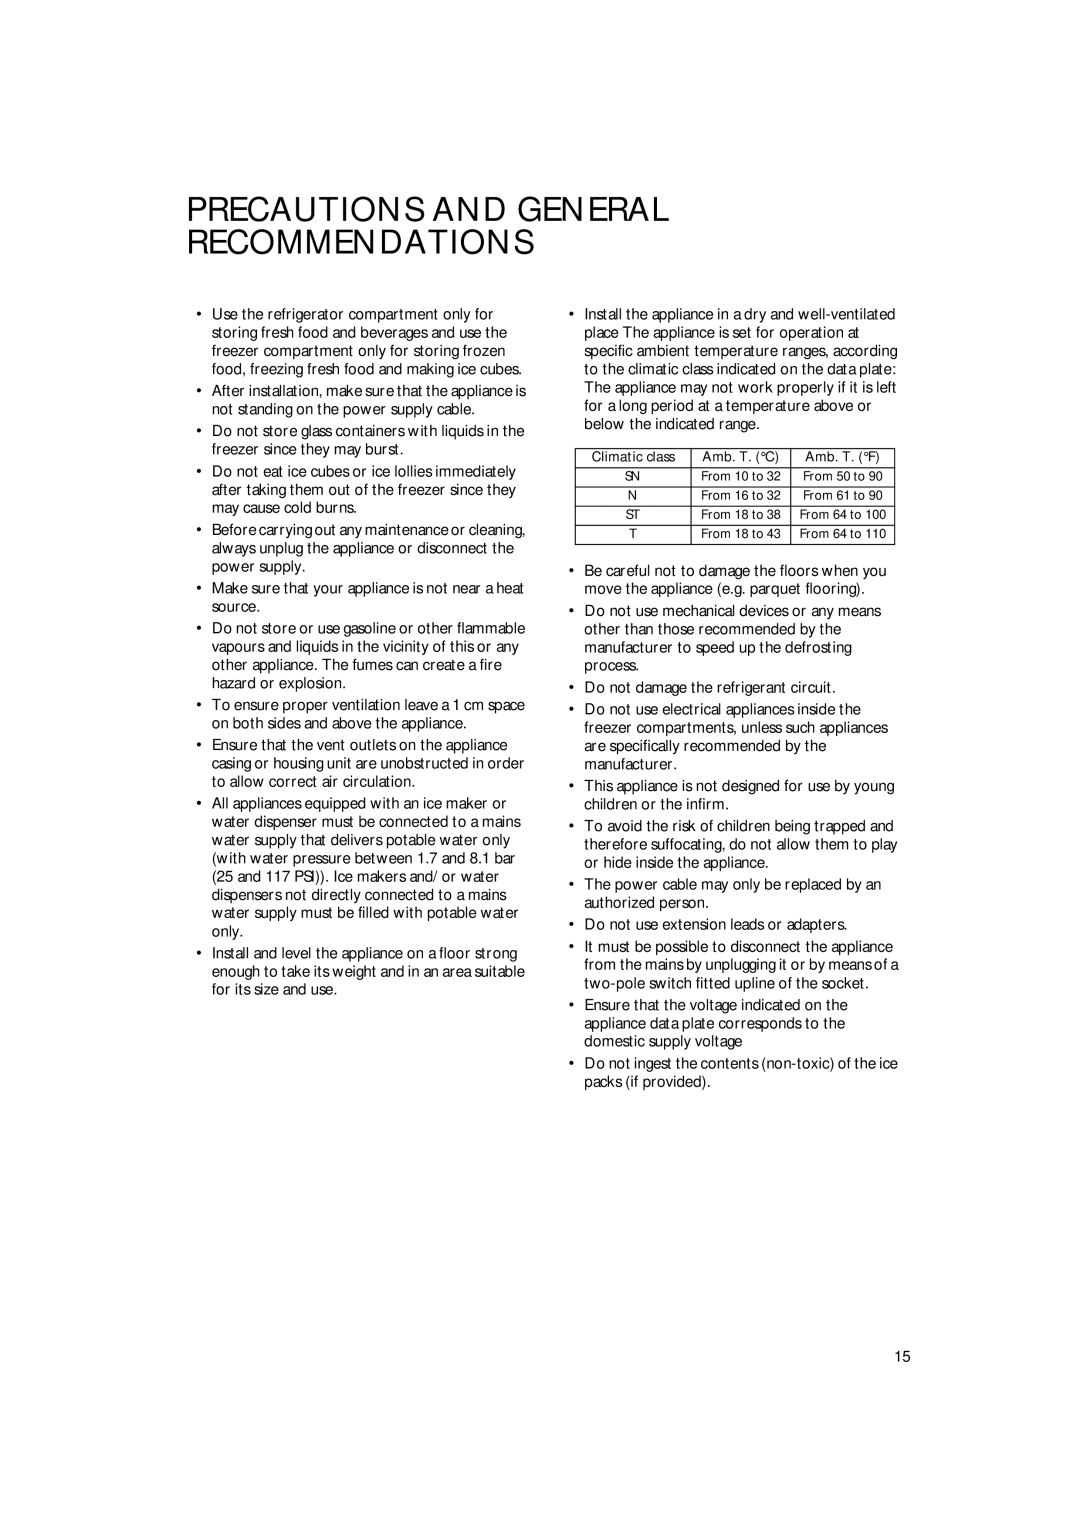 Smeg CR327AV1 manual Precautions And General Recommendations, Make sure that your appliance is not near a heat source 